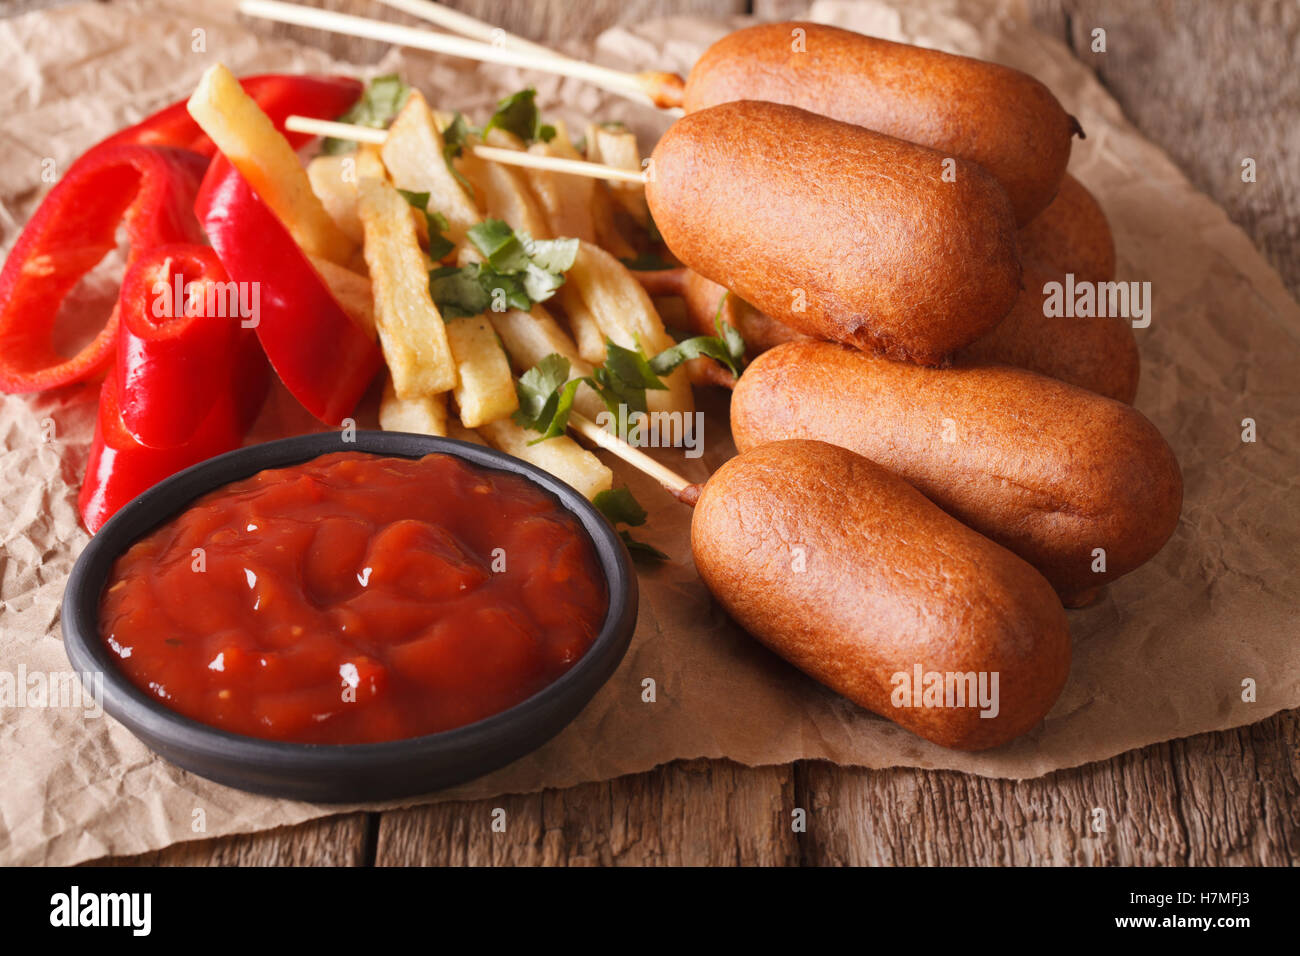 Corn dogs, french fries, pepper and ketchup on the table close-up. horizontal Stock Photo